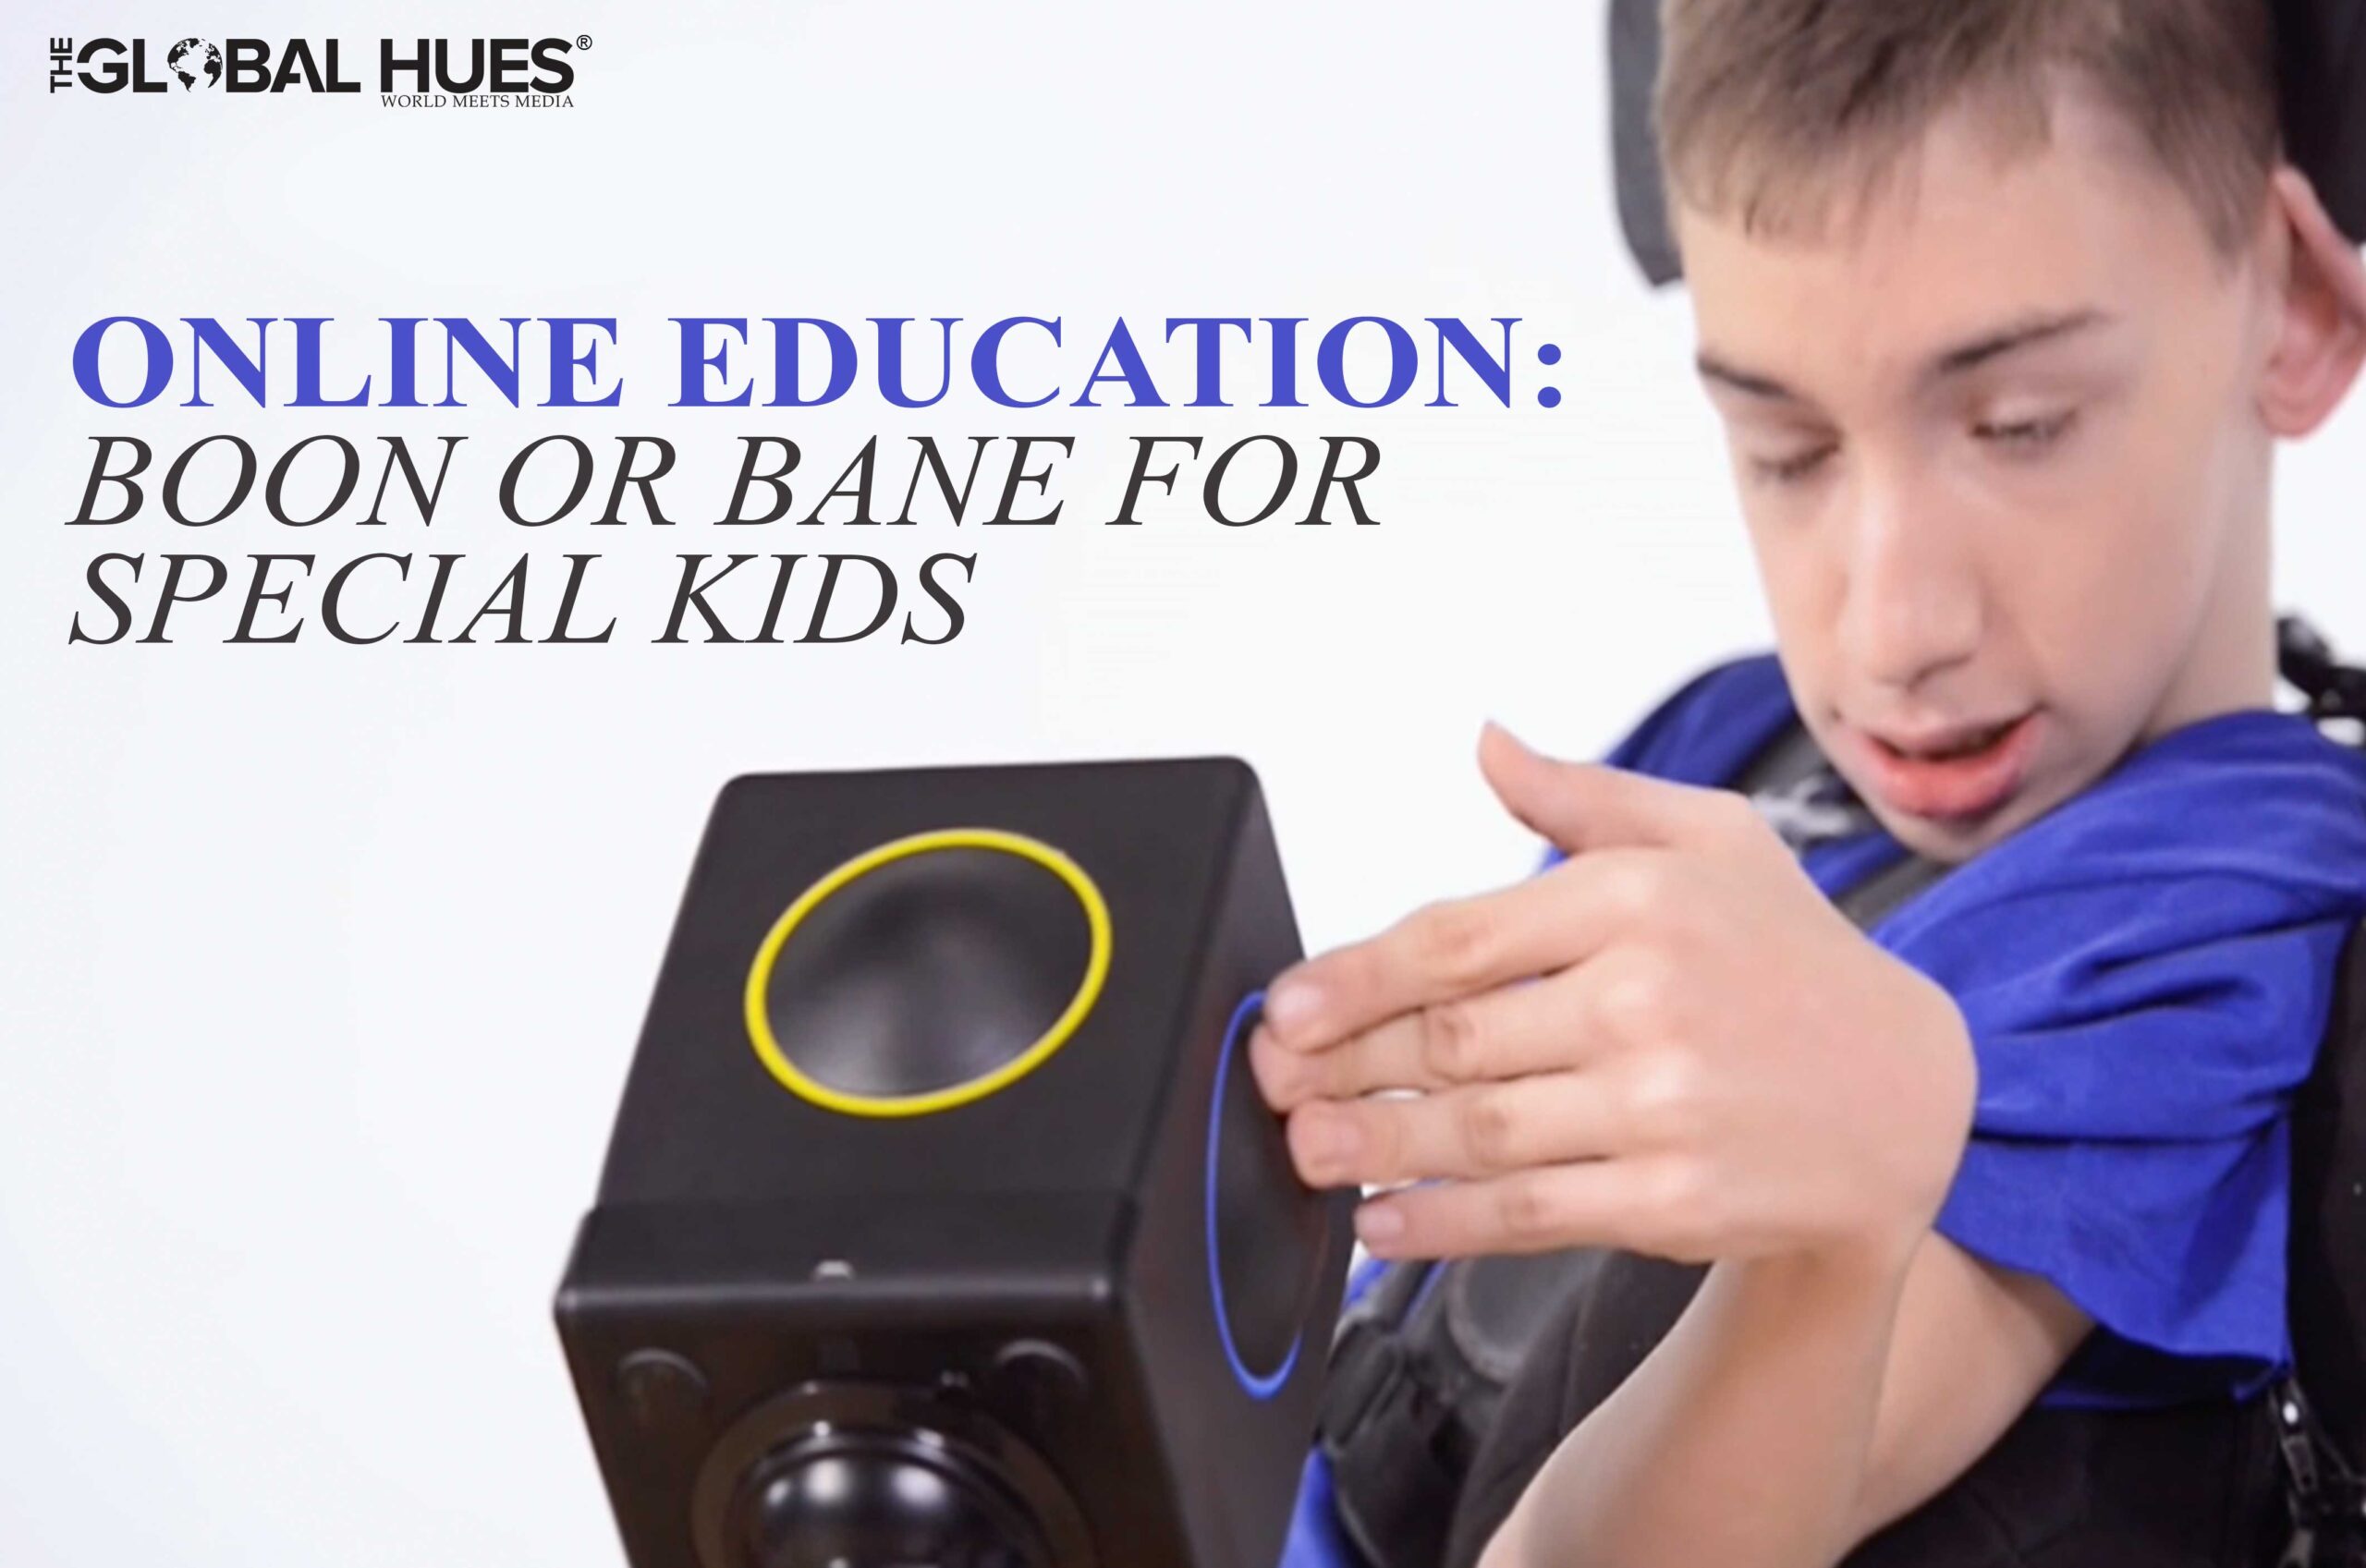 Online education: Boon or bane for special kids